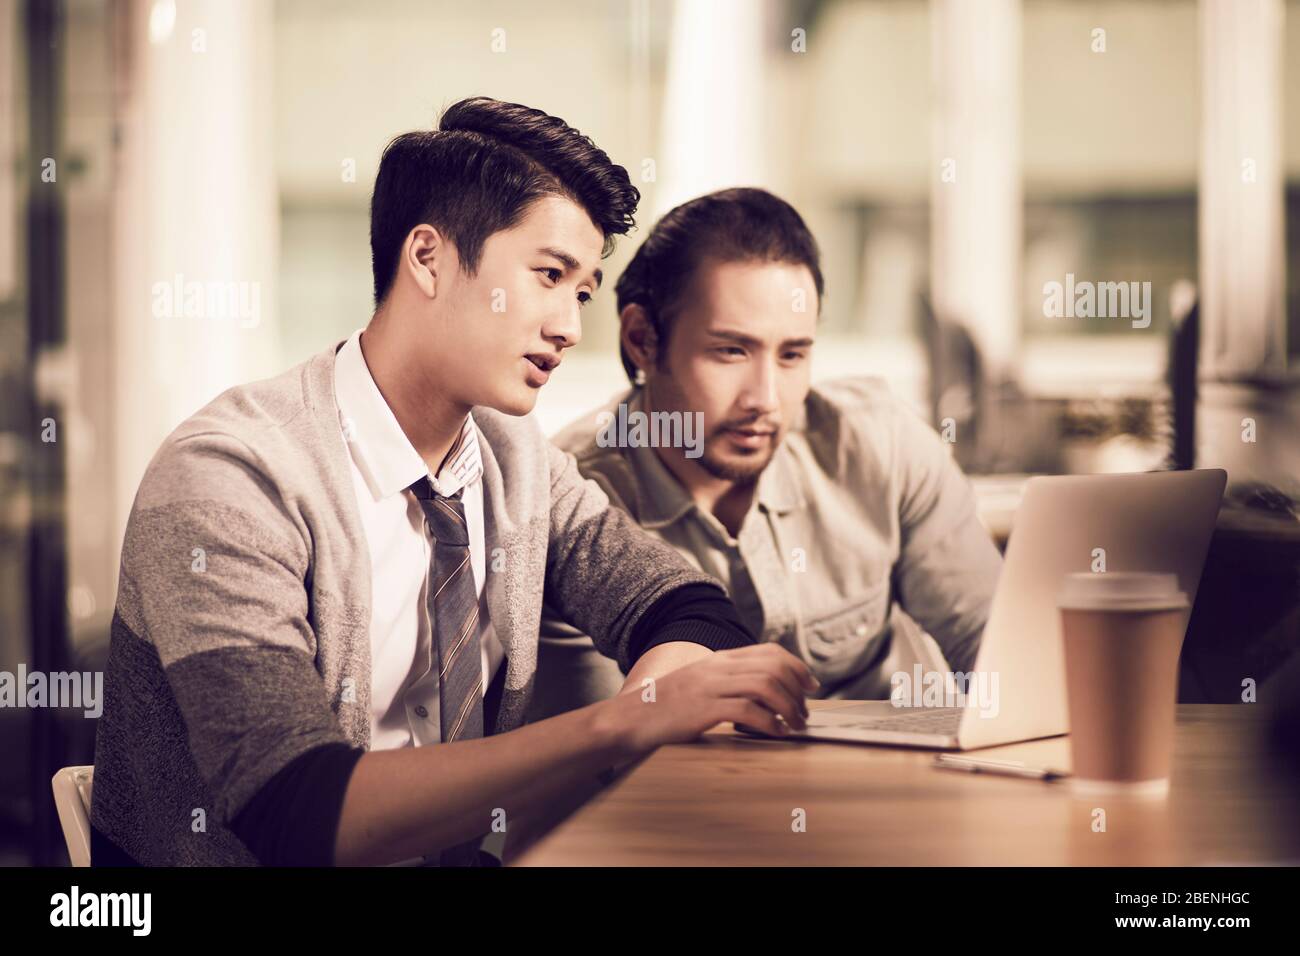 two young asian business men entrepreneurs working together in office using laptop computer Stock Photo